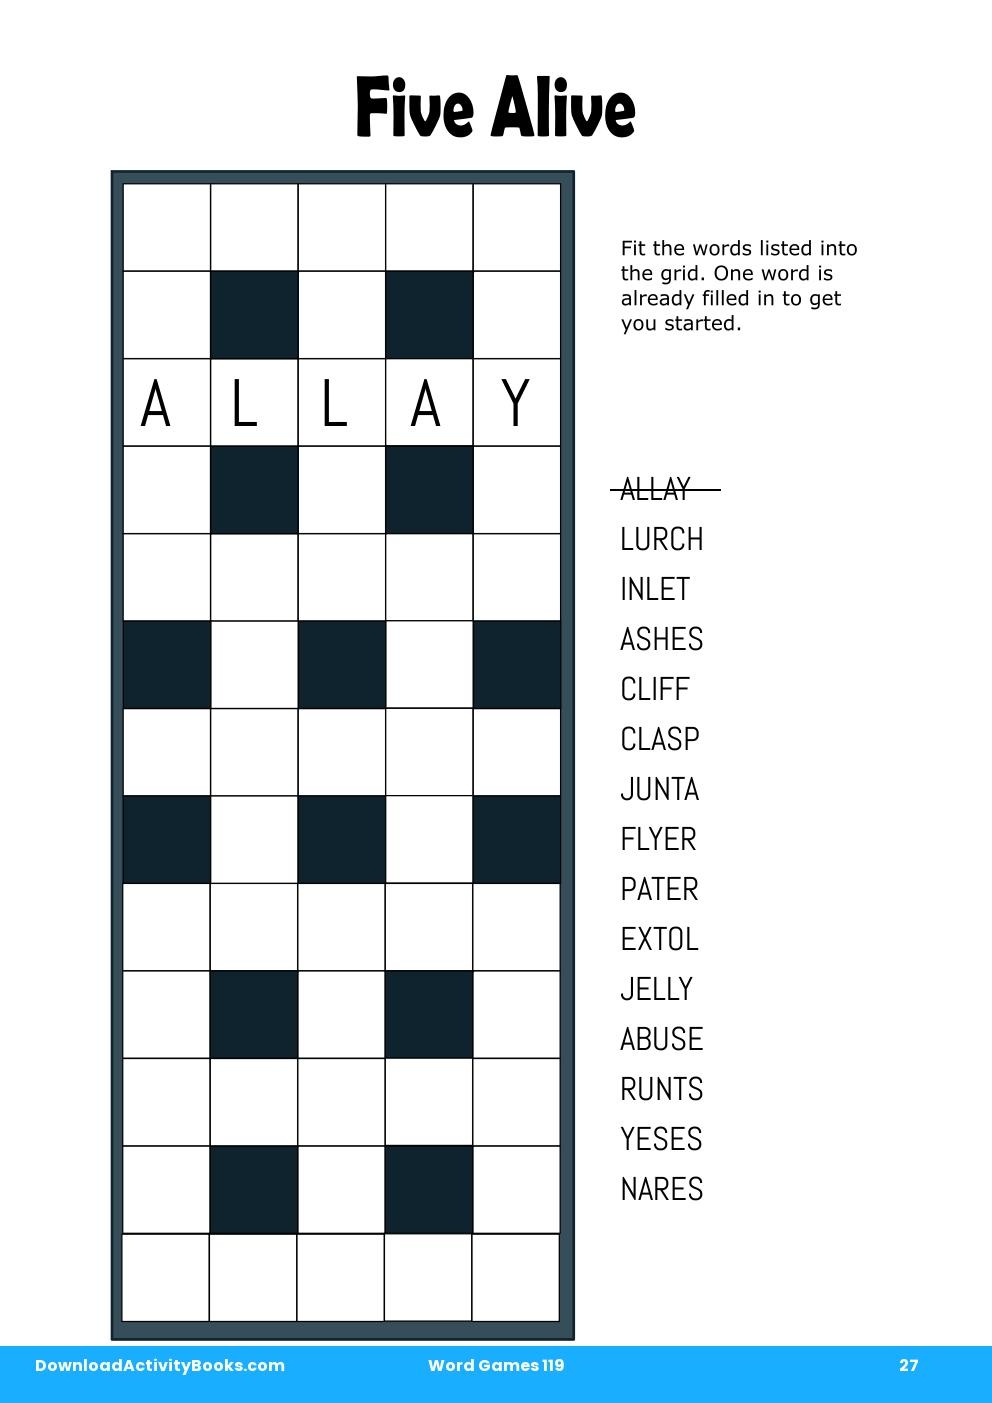 Five Alive in Word Games 119